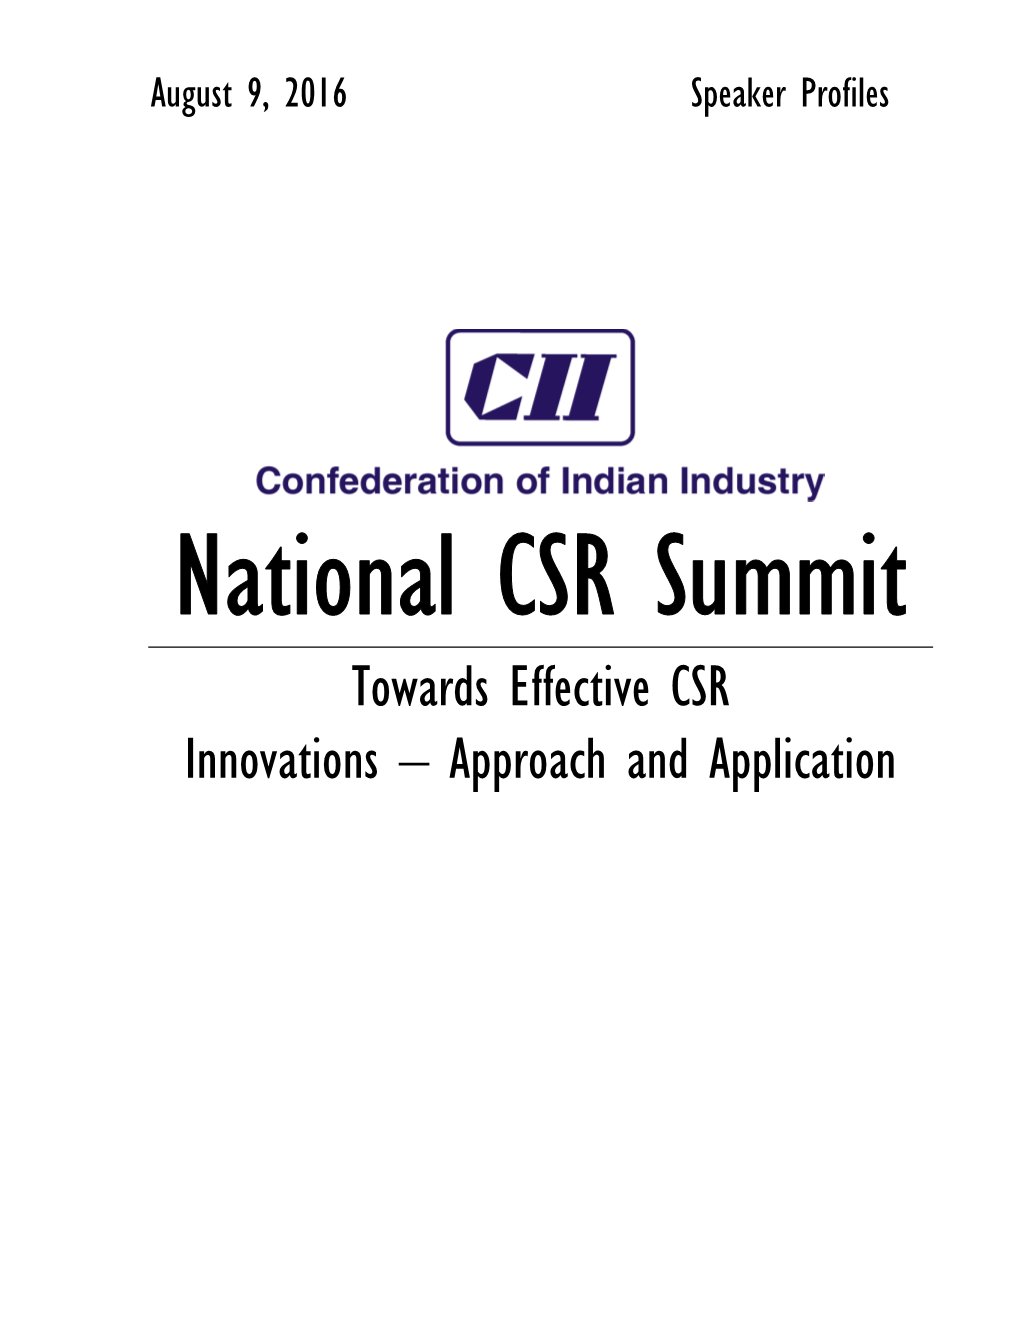 Towards Effective CSR Innovations – Approach and Application